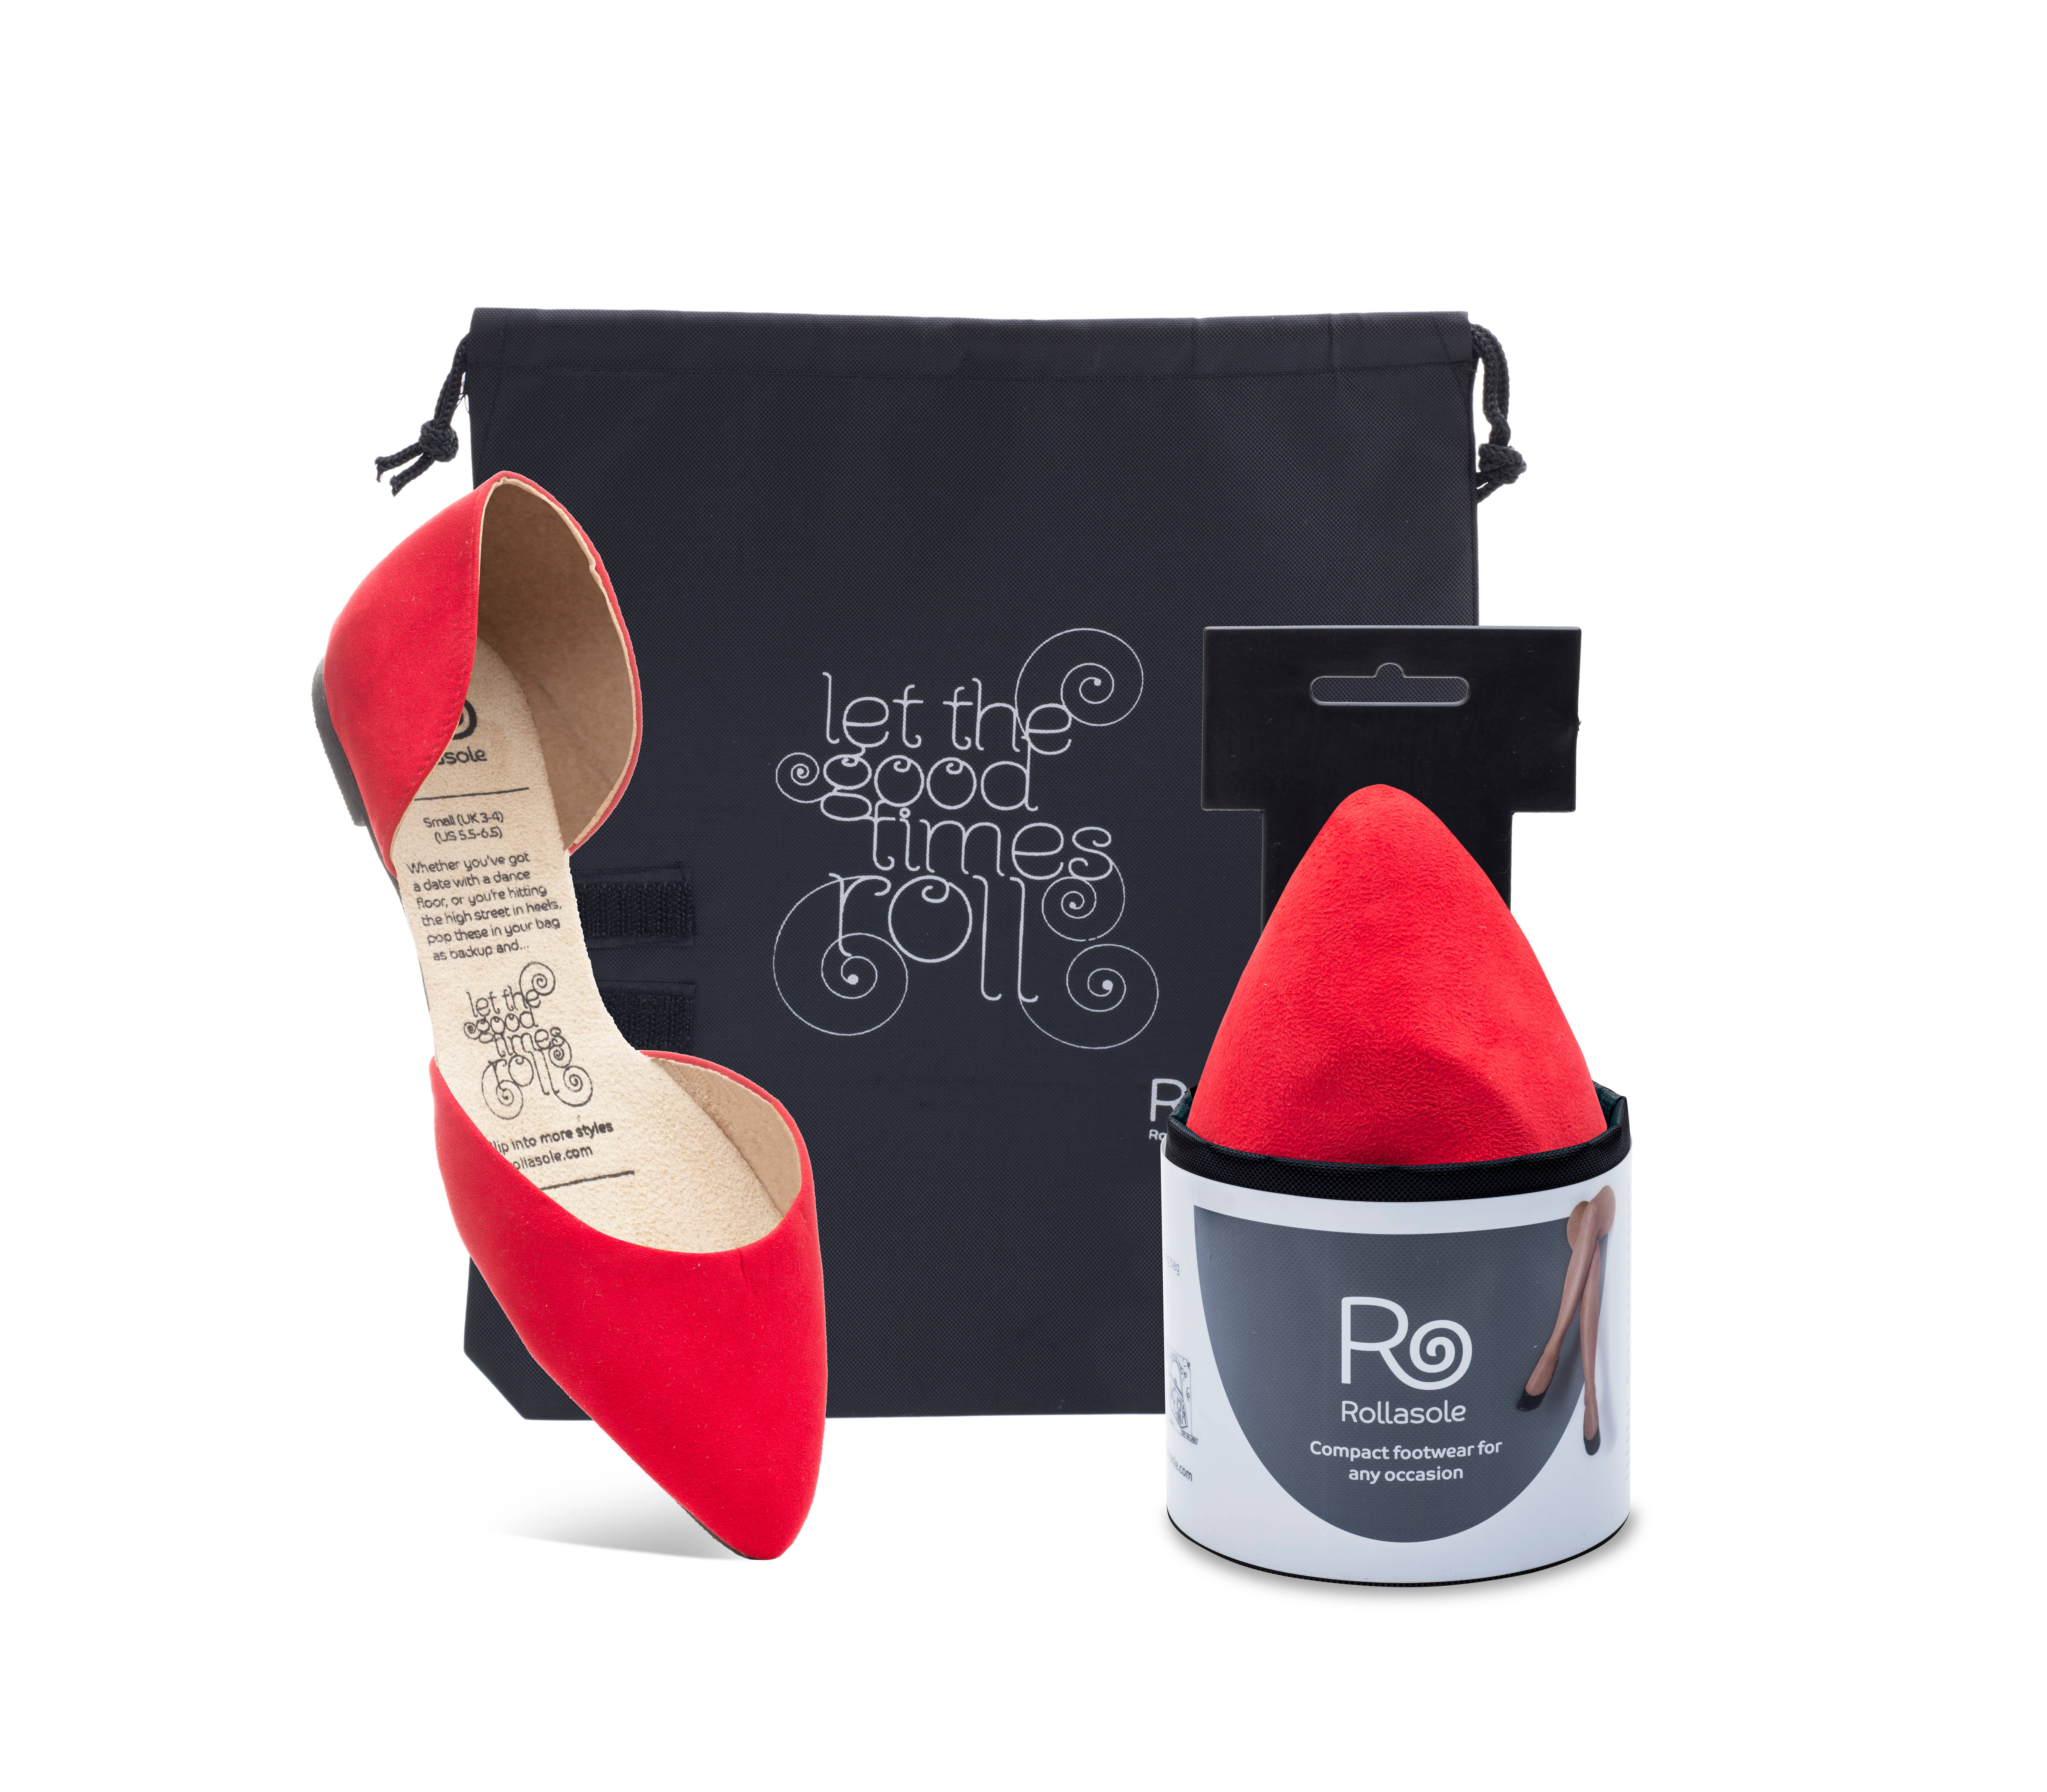 red shoe lover wholesale